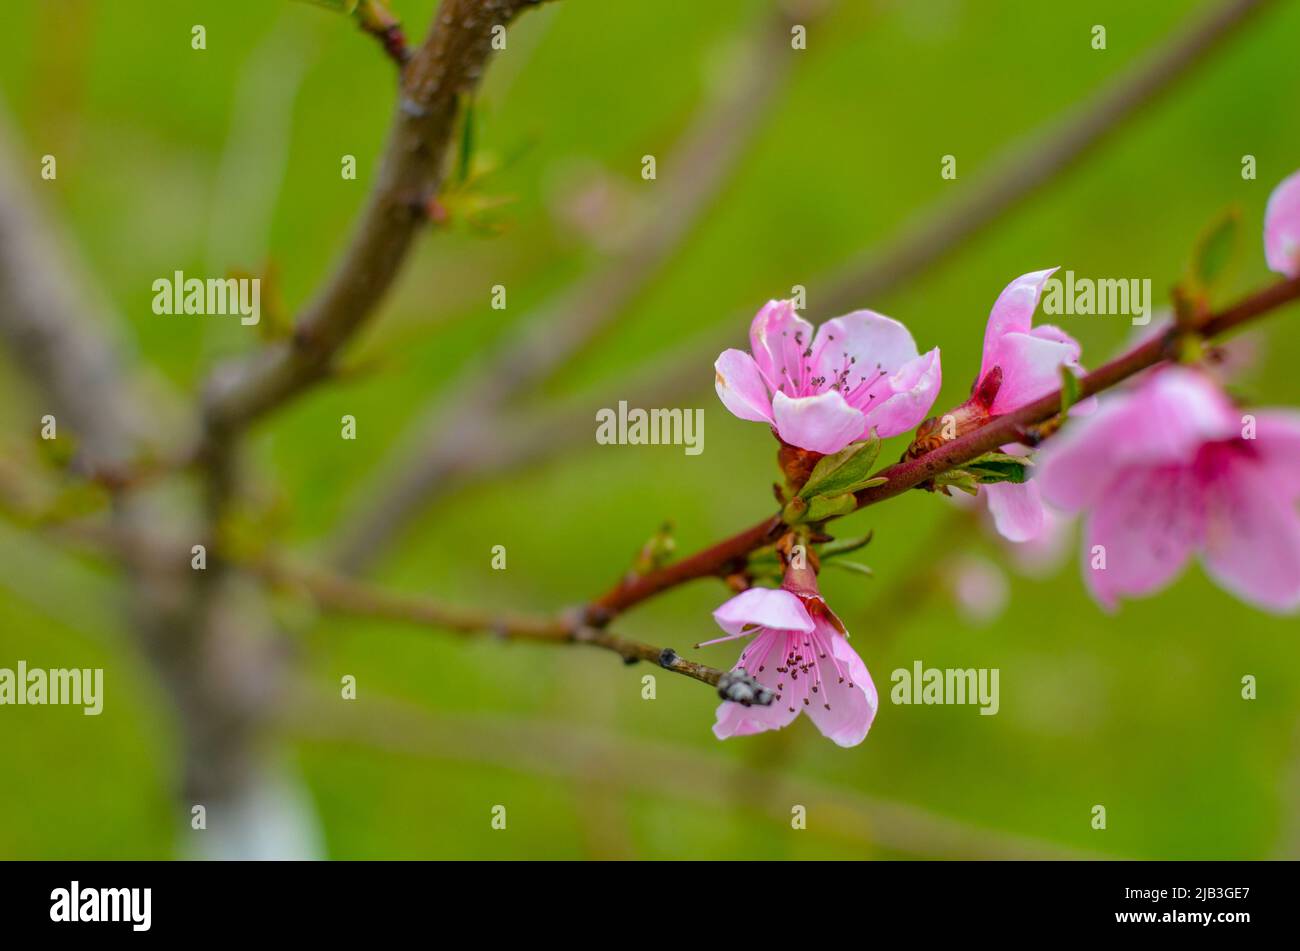 Peach blossom in the sunny day on green grass background Stock Photo